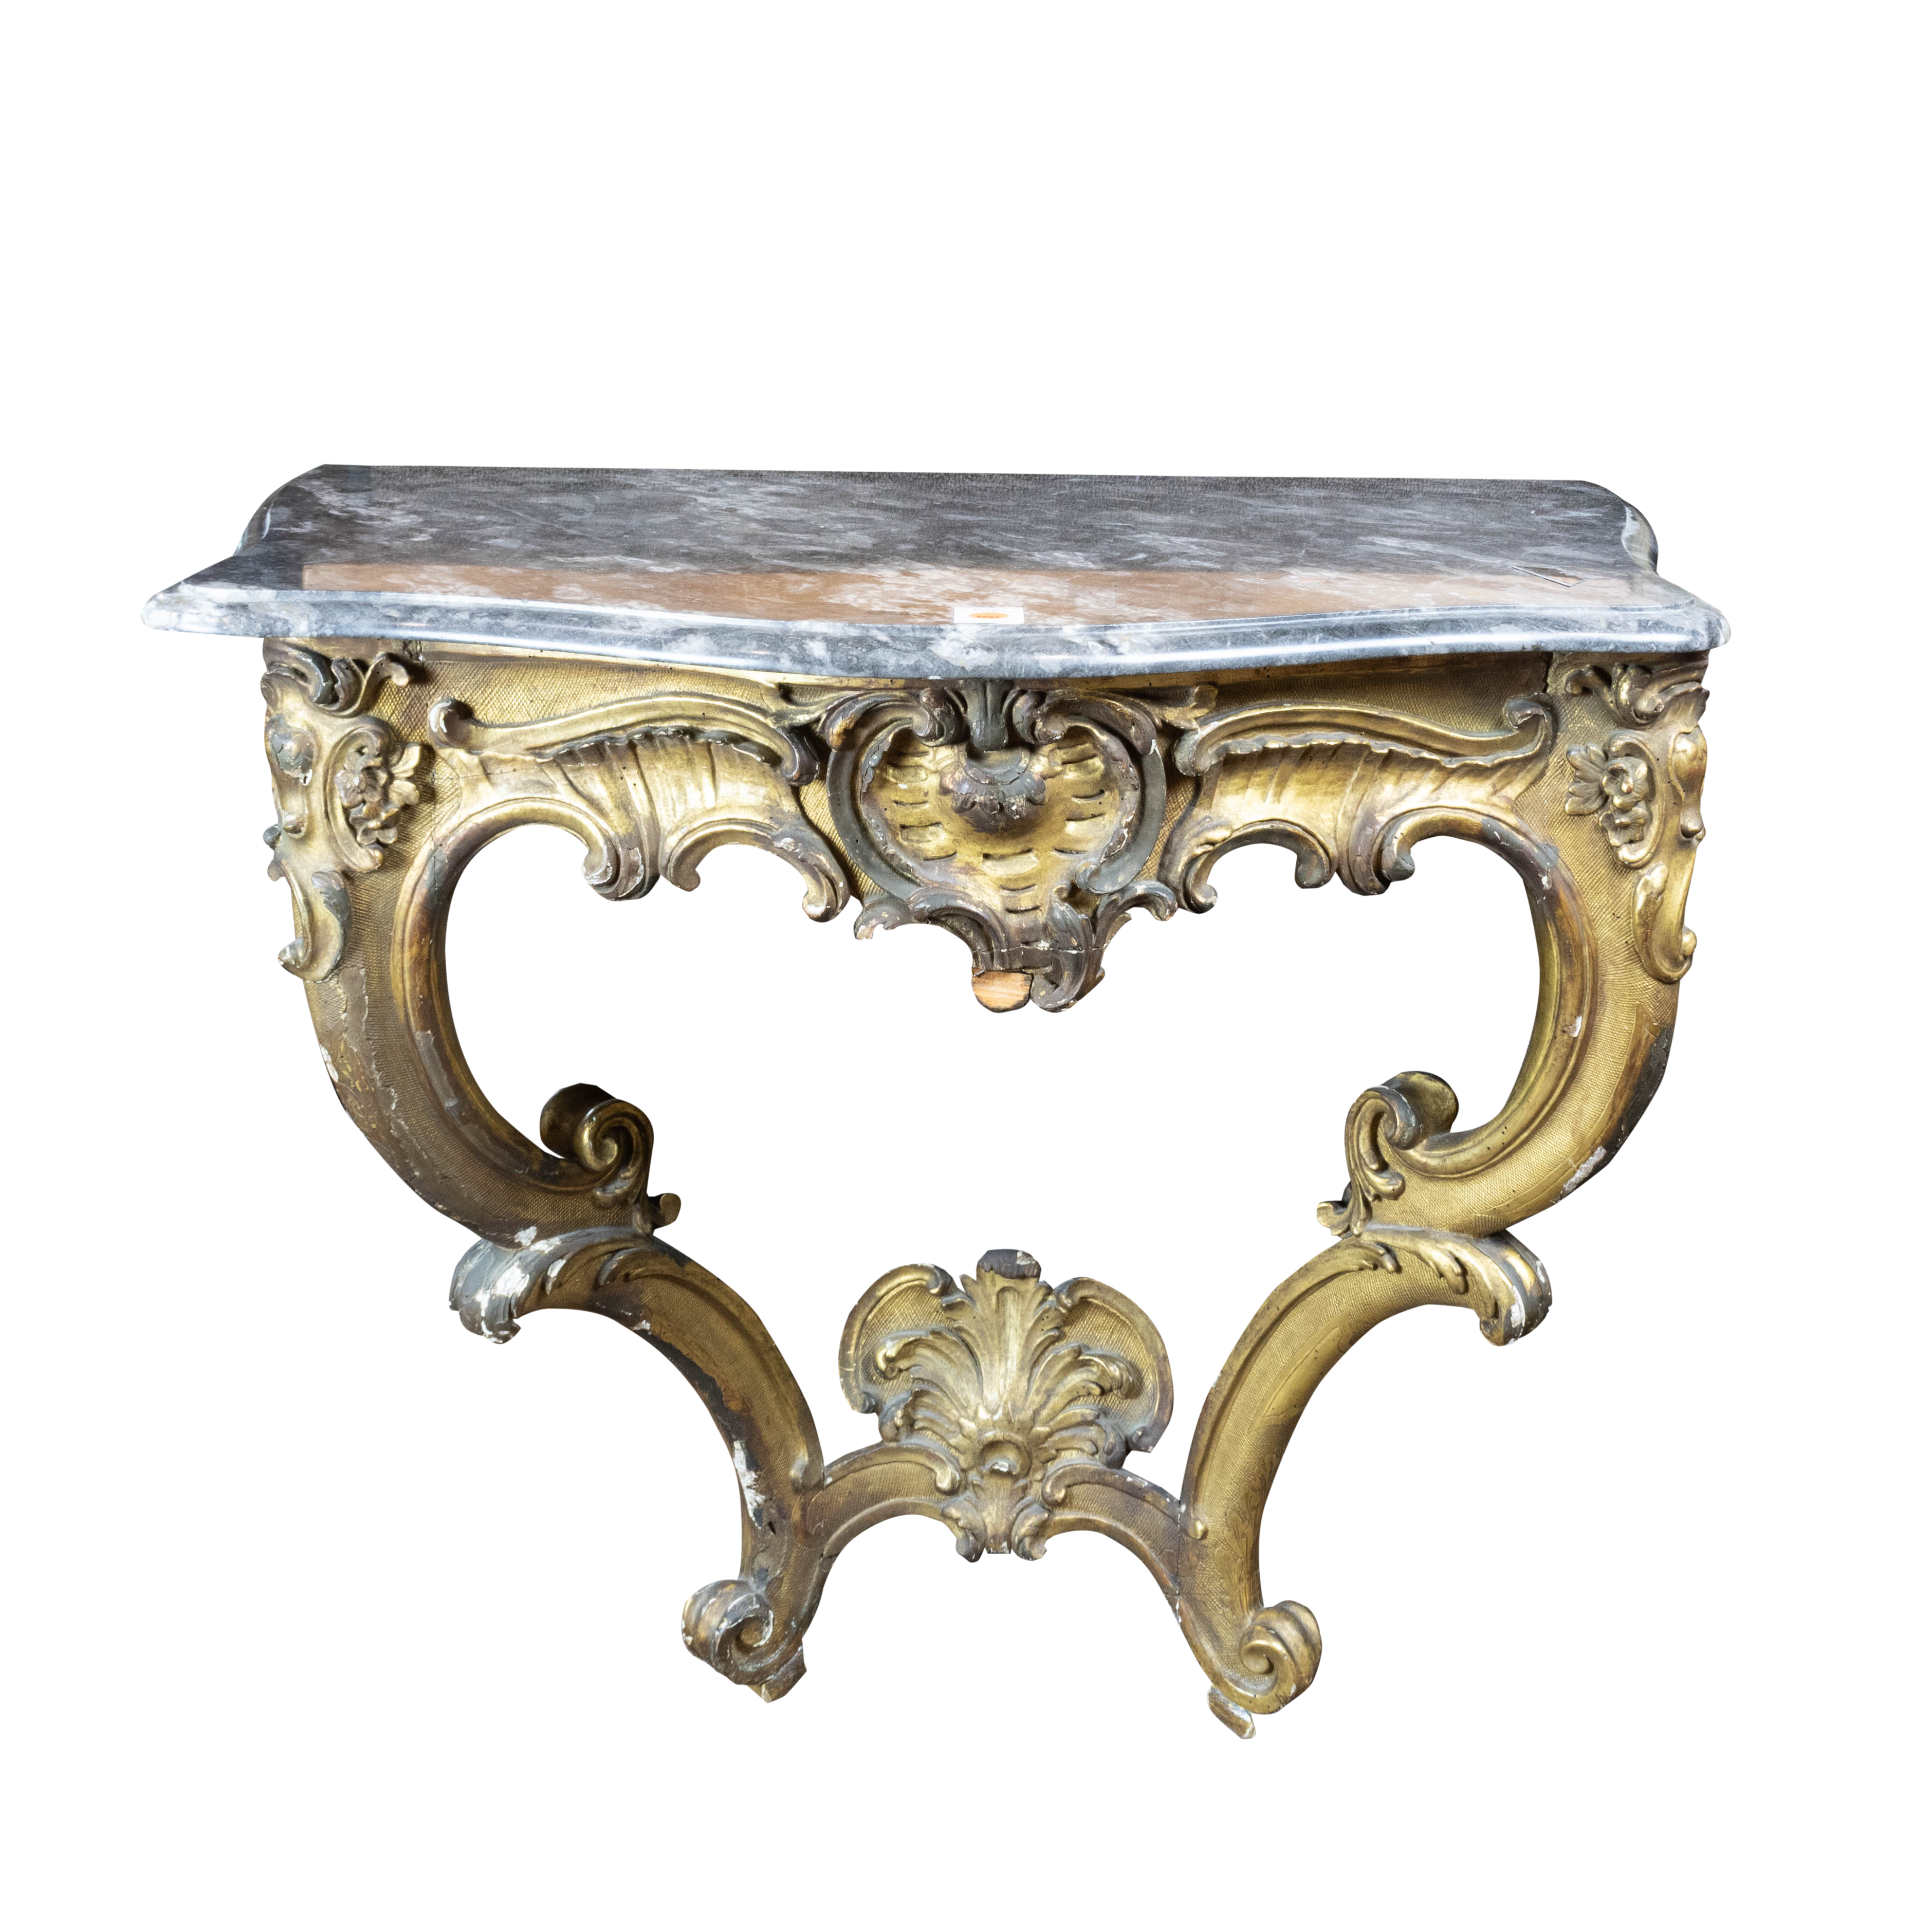 A GILTWOOD CARVED MARBLE TOP CONSOLE 3a6545